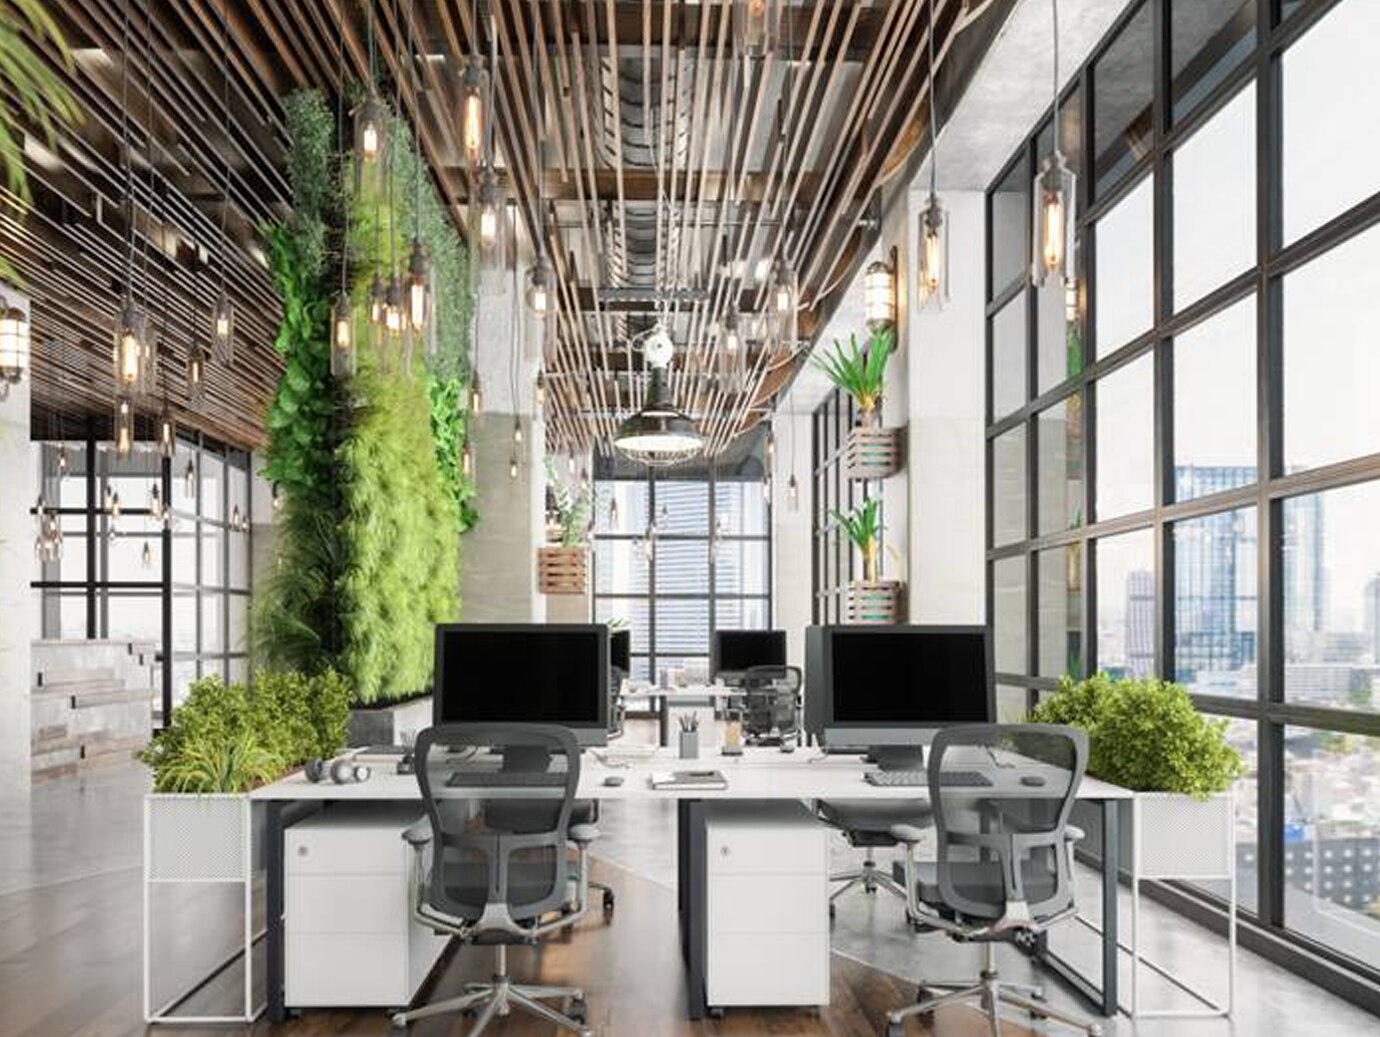 Interior of a modern office decorated with green plants